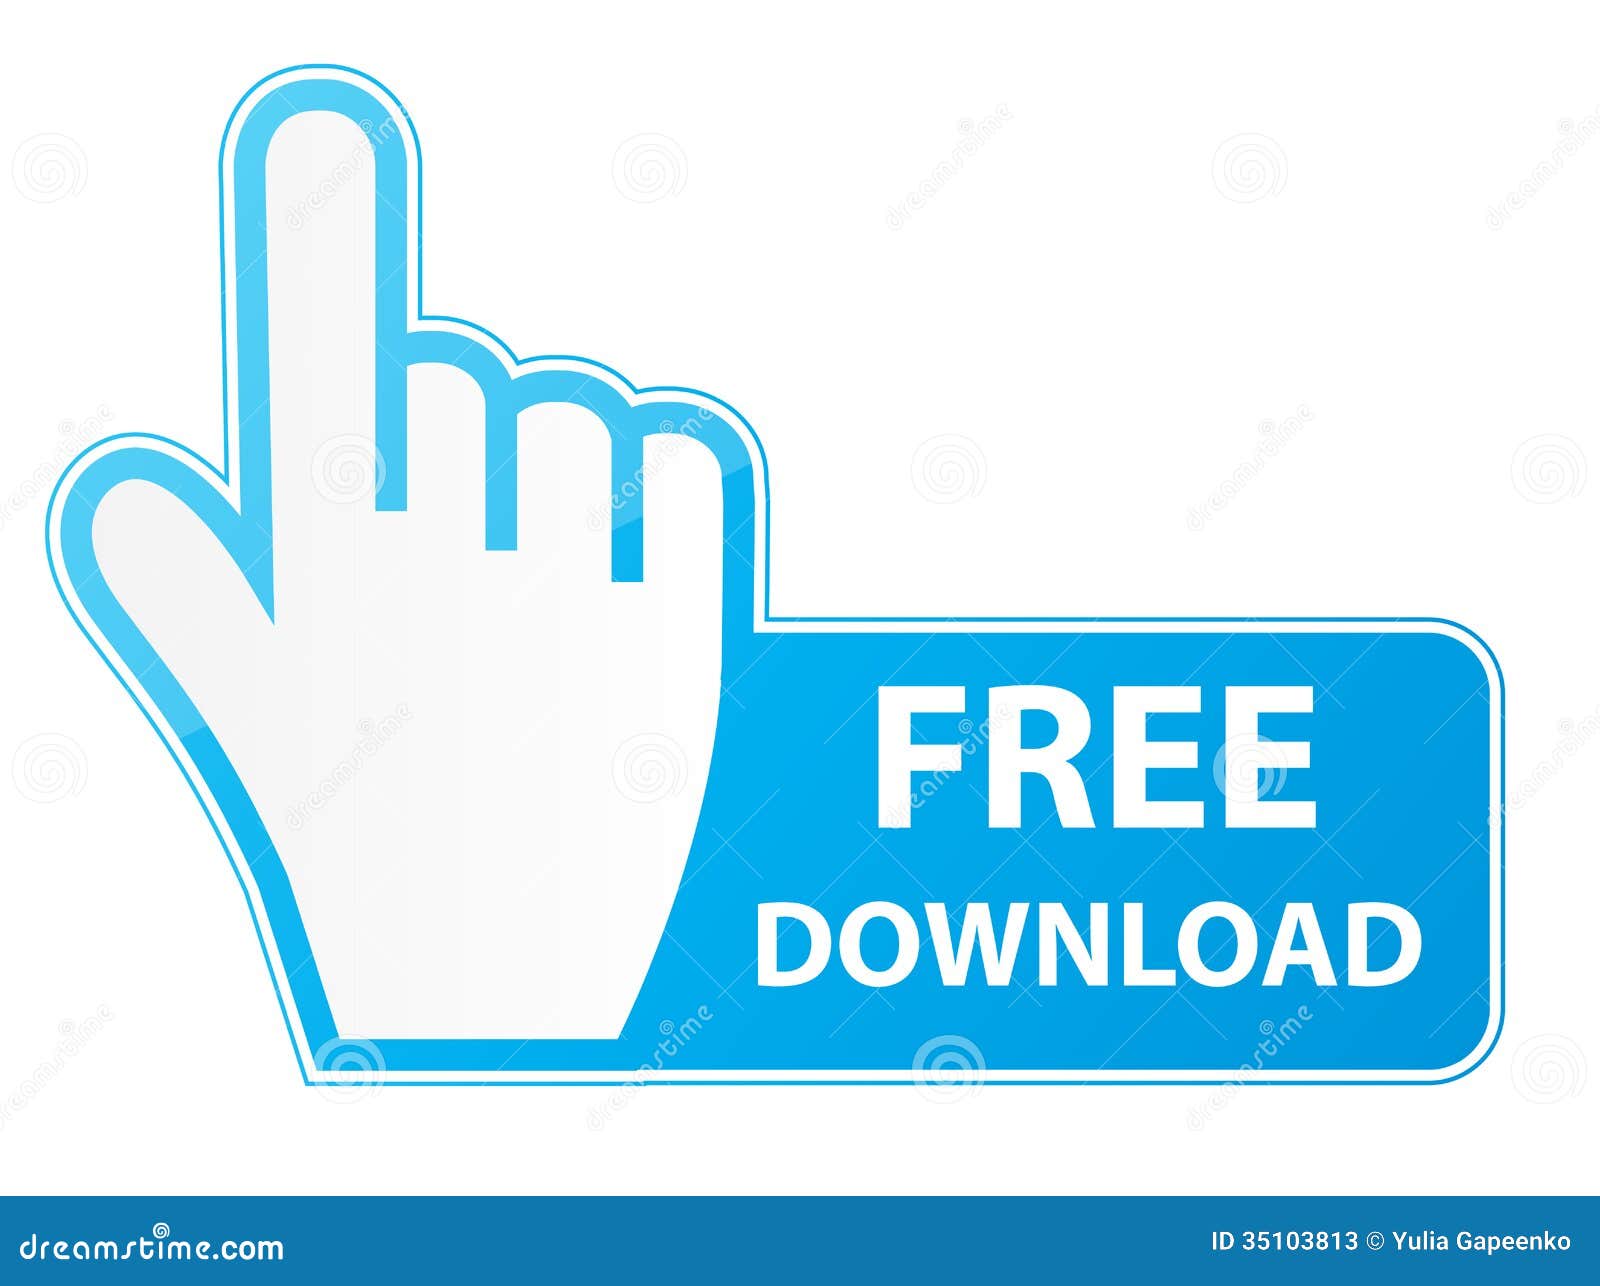 mouse hand cursor free download button vector illustration file eps format 35103813